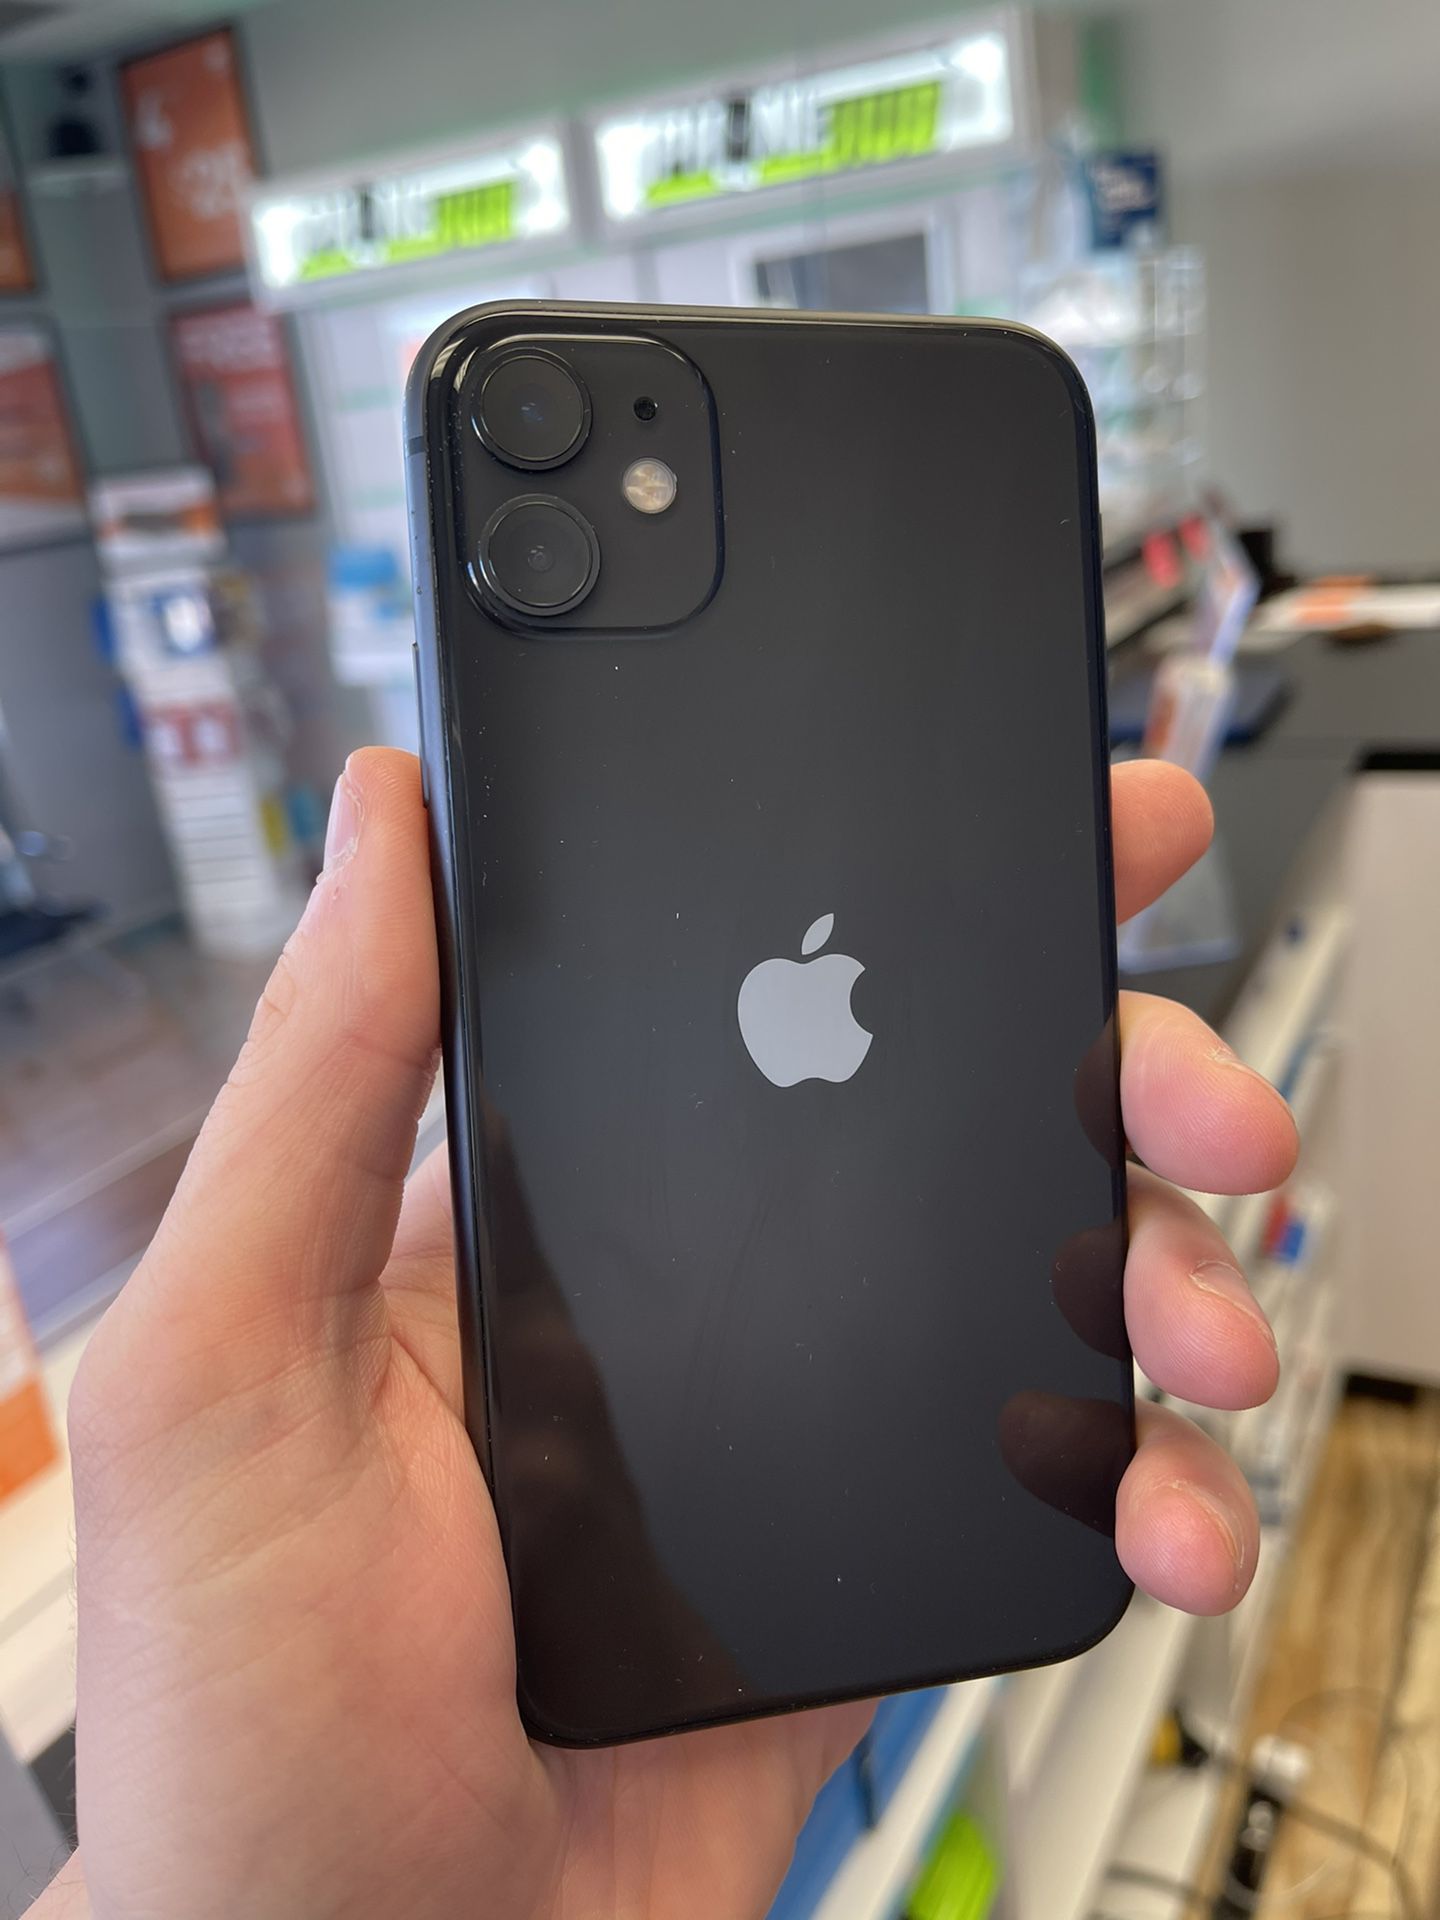 Finance Unlocked iPhone 11 Black 128gb - Only $25 down today!